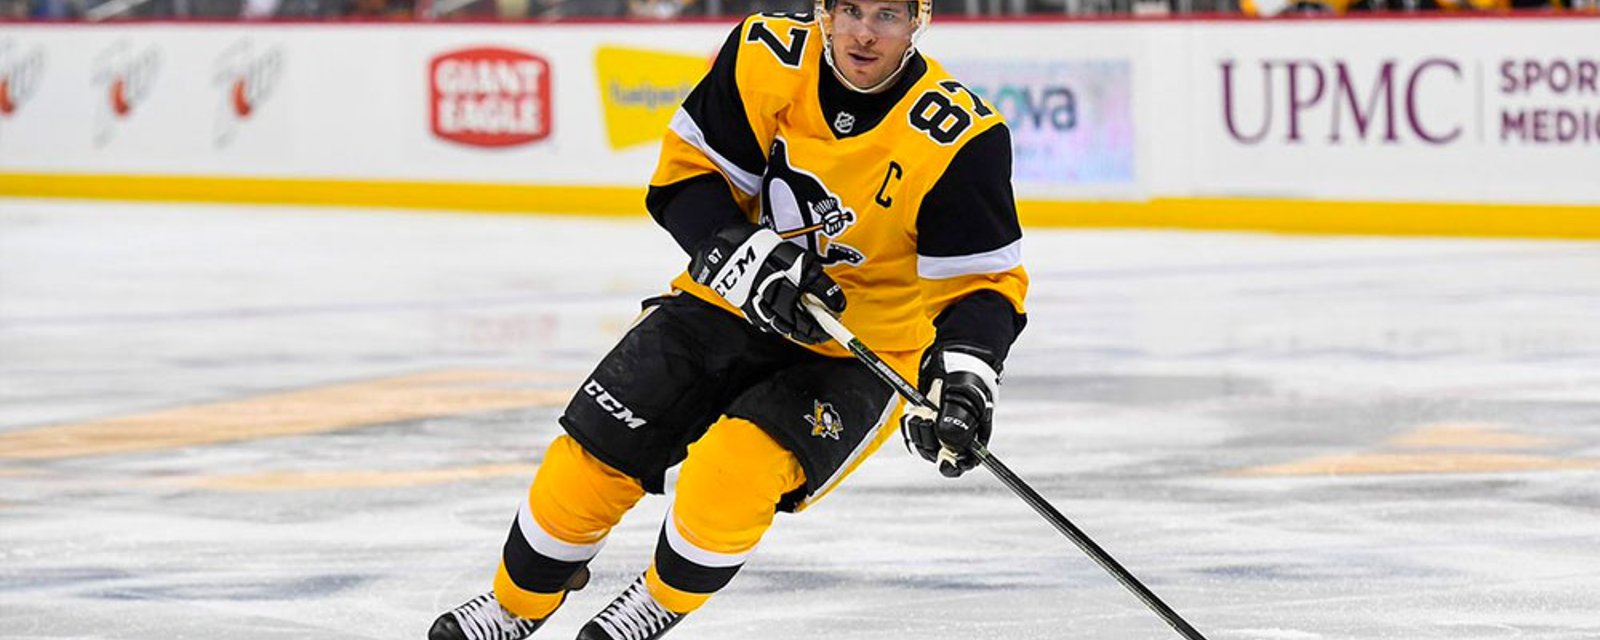 Crosby out long-term after abdominal surgery